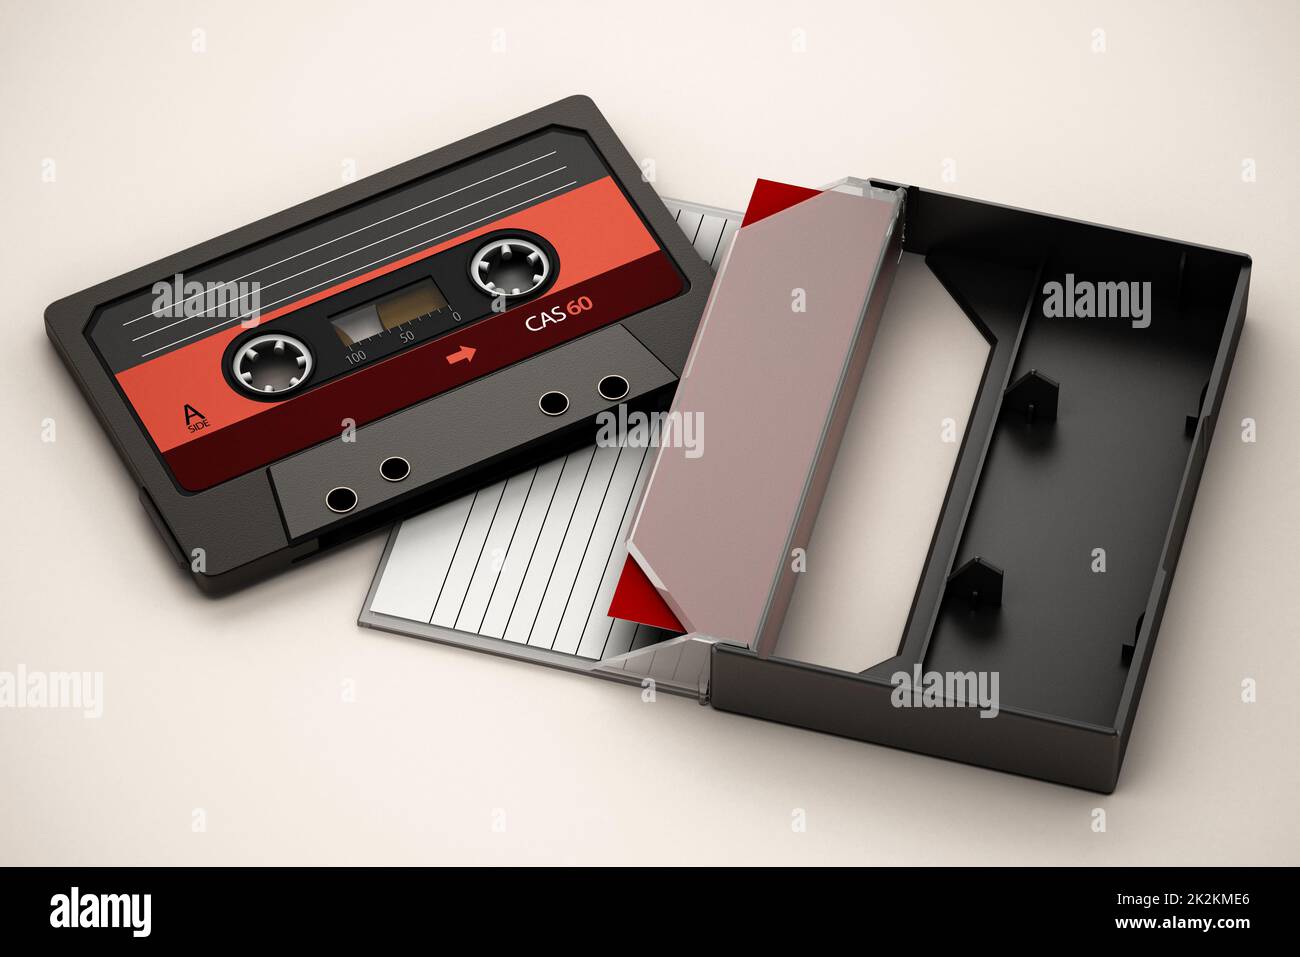 Blank compact cassette tape box design mockup view. Vintage cassete tape  record case box mock up. Plastic analog magnetic tape cassette clear  packaging template. Mixtape box cover. Stock Photo